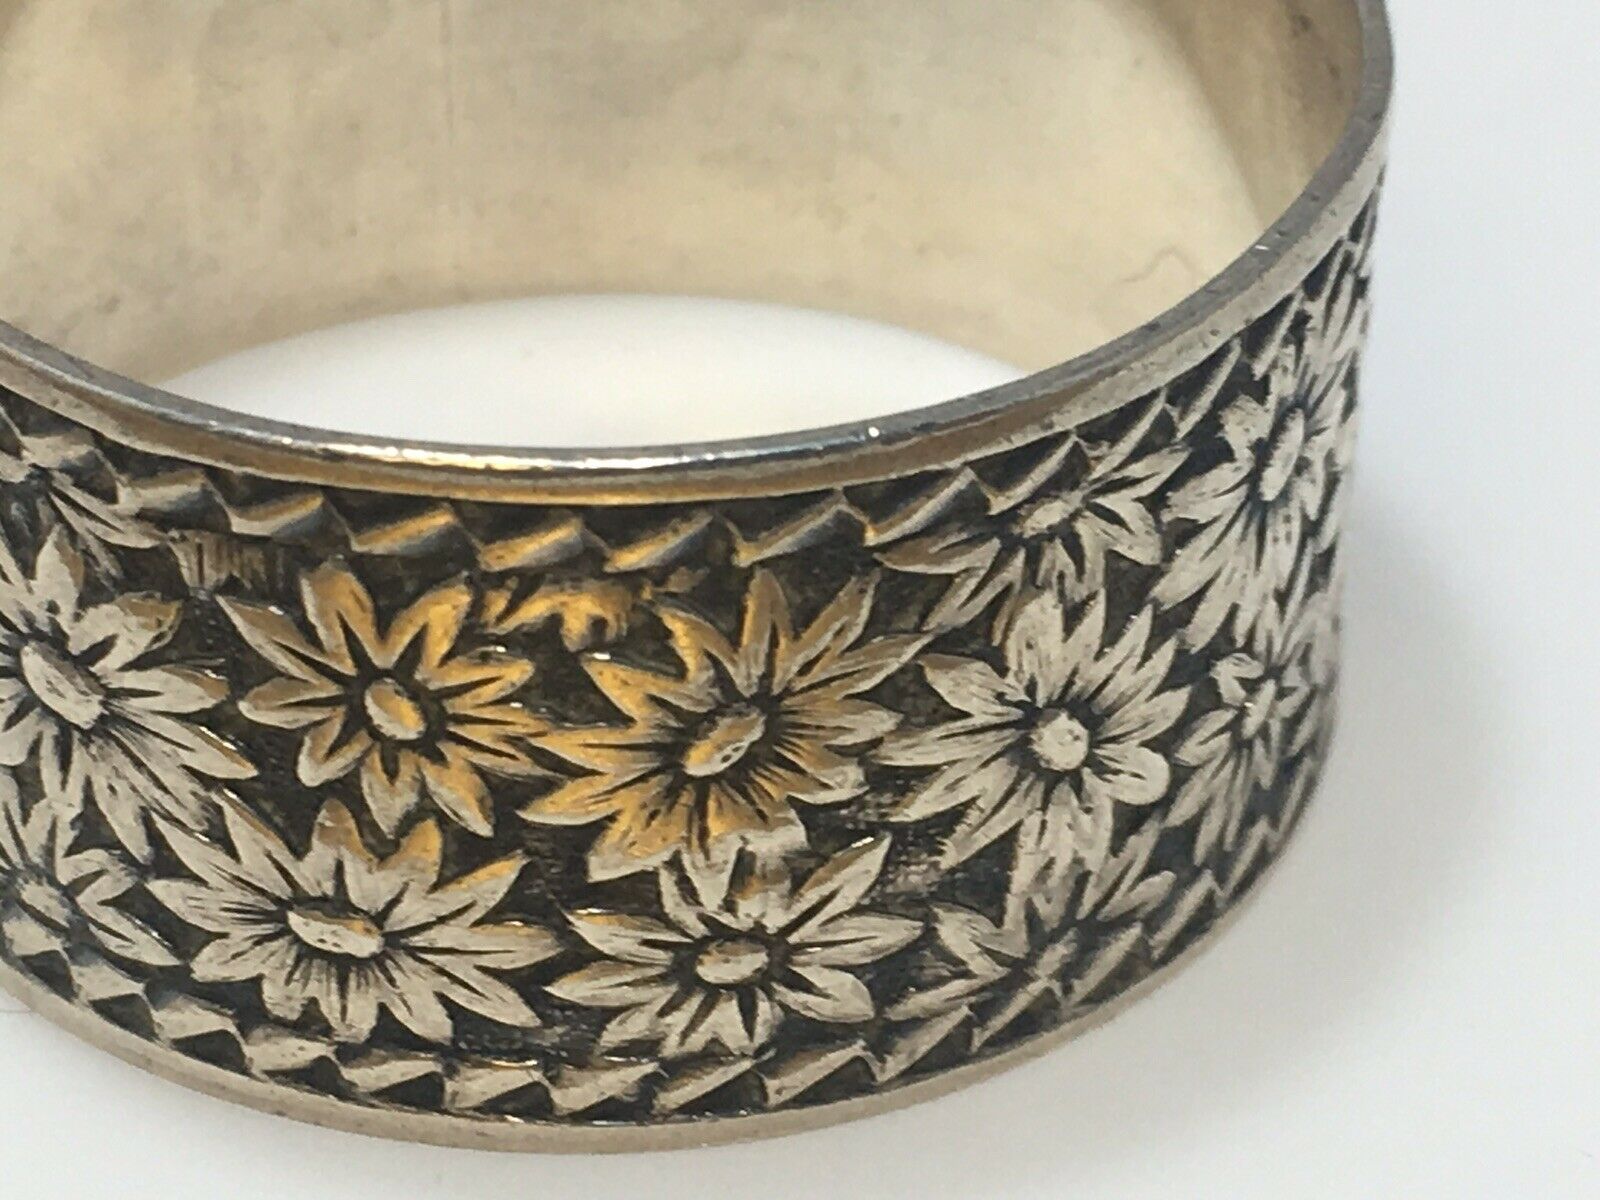 Shiebler Repousse Poppy Daisy Floral Sterling Silver Napkin Ring